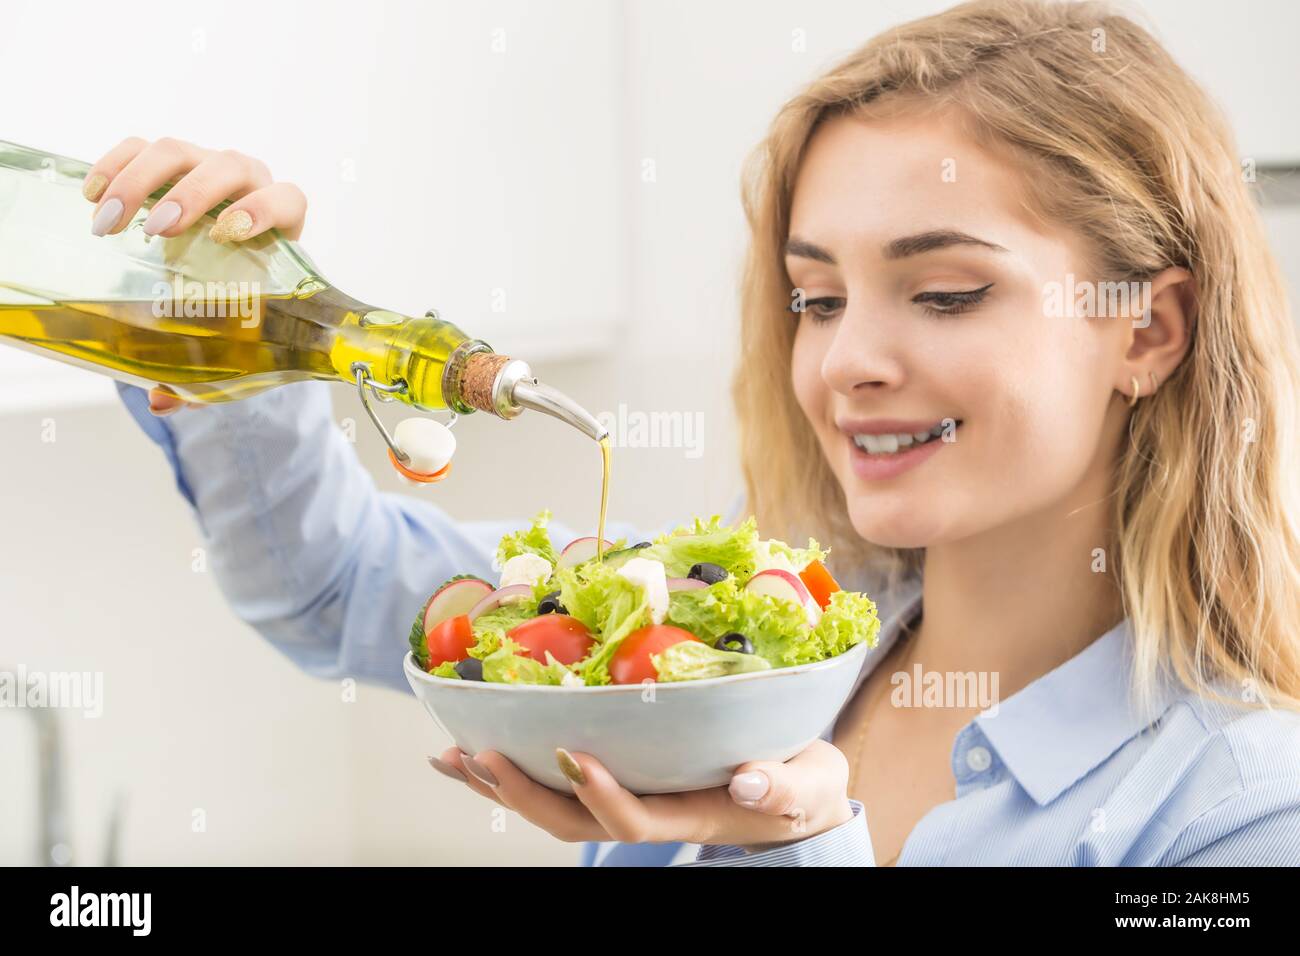 Young woman pouring olive oil in to the salad. Healthy lifestyle eating concept. Stock Photo